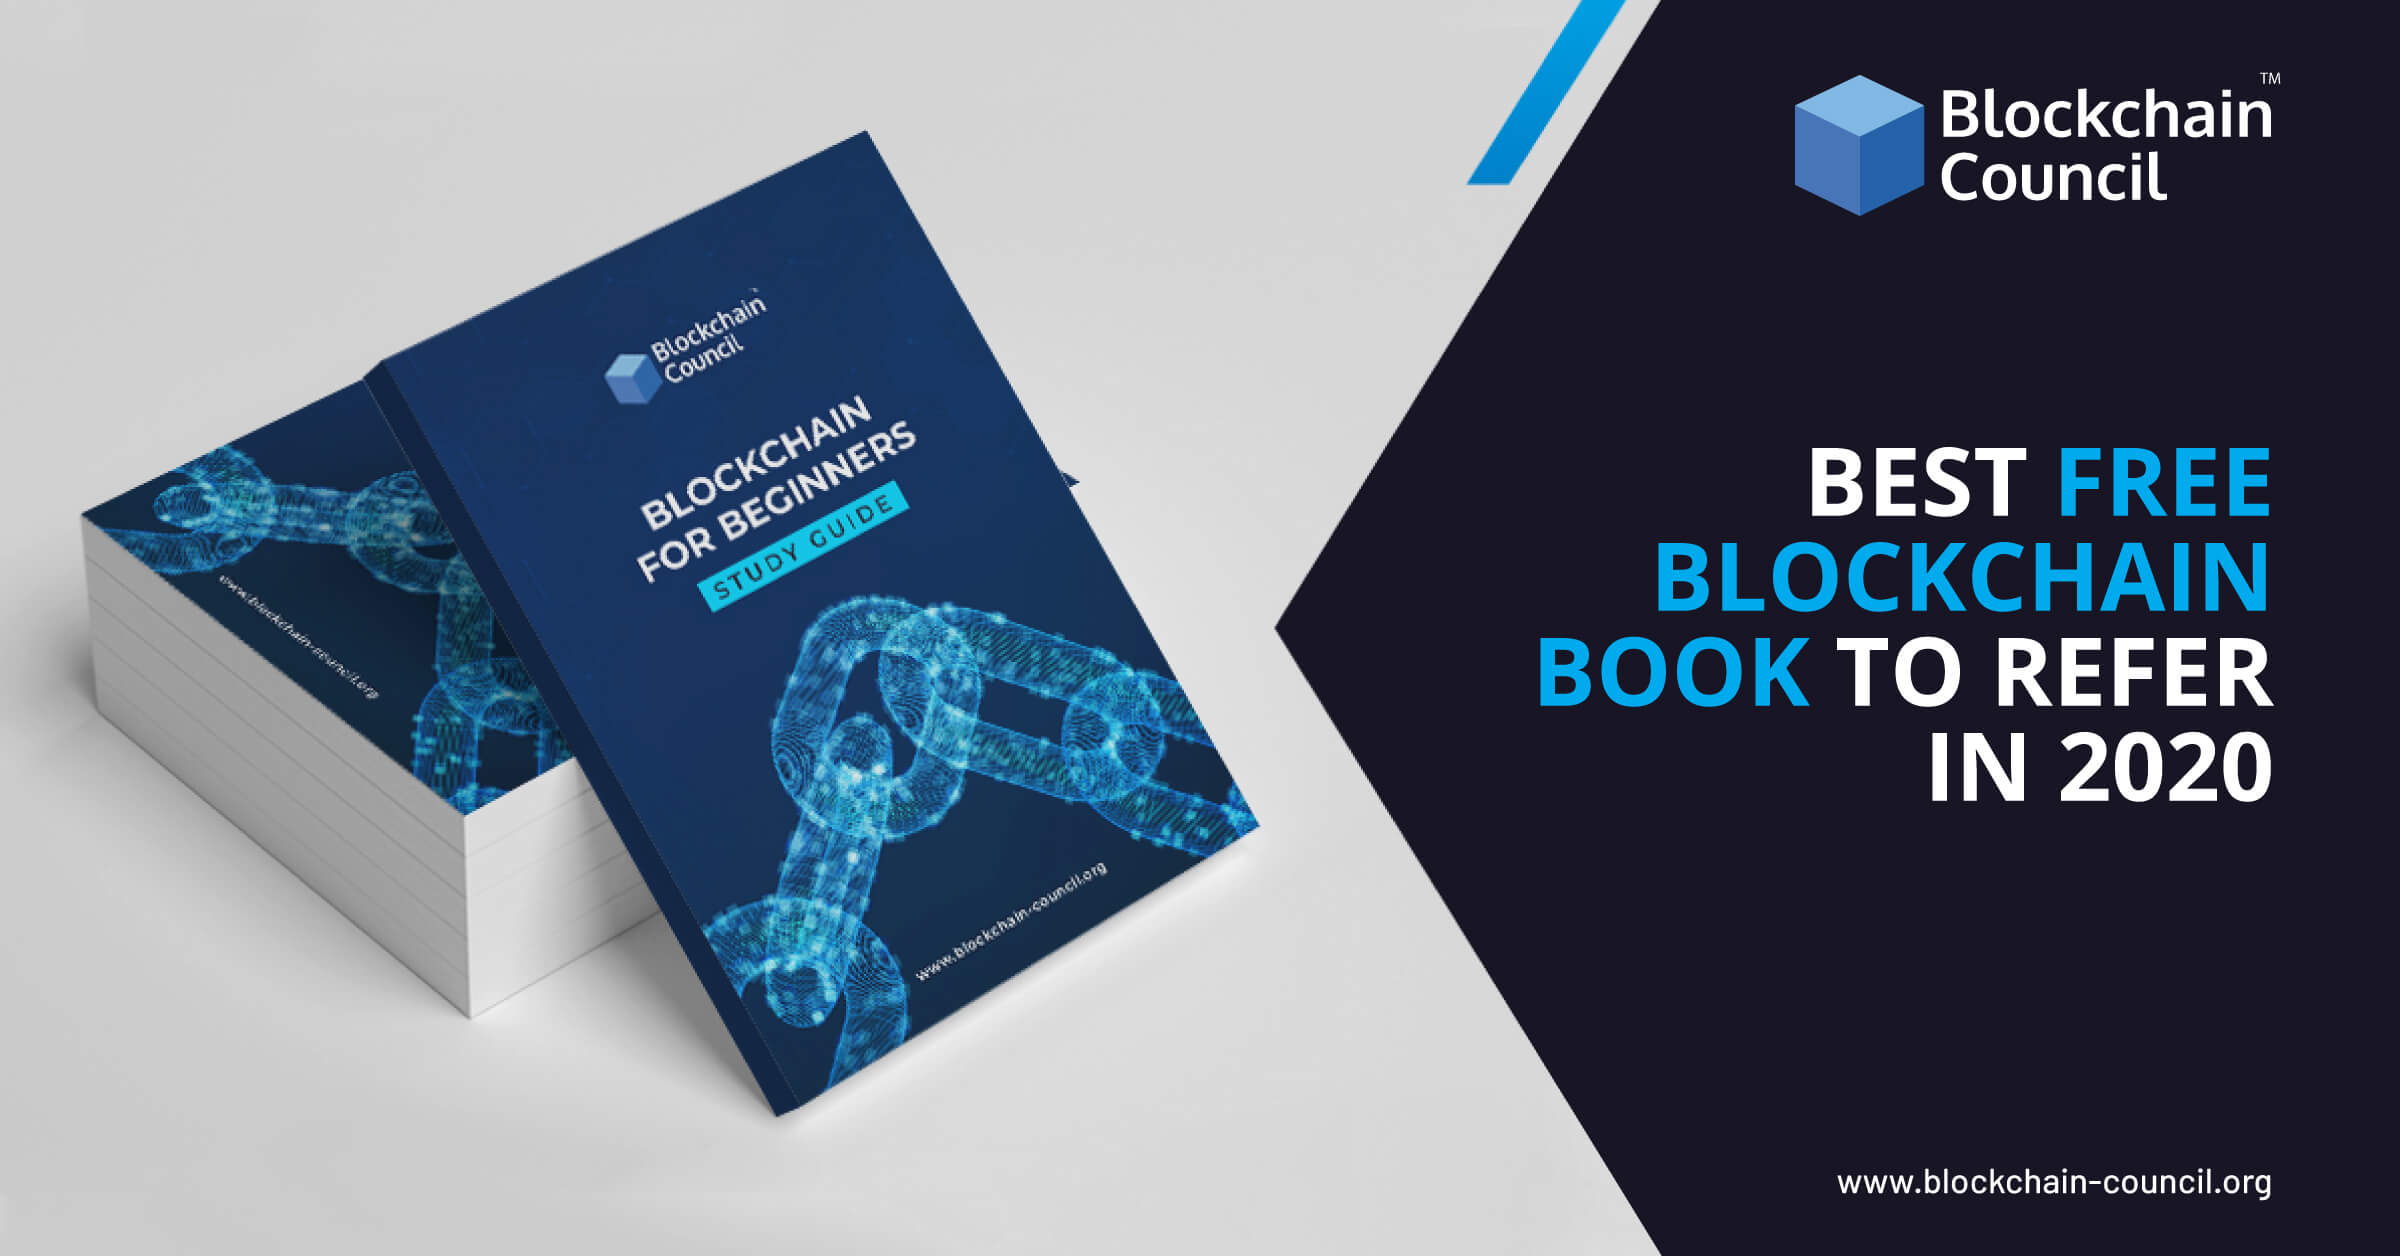 Best-Free-Blockchain-Book-To-Refer-in-2020